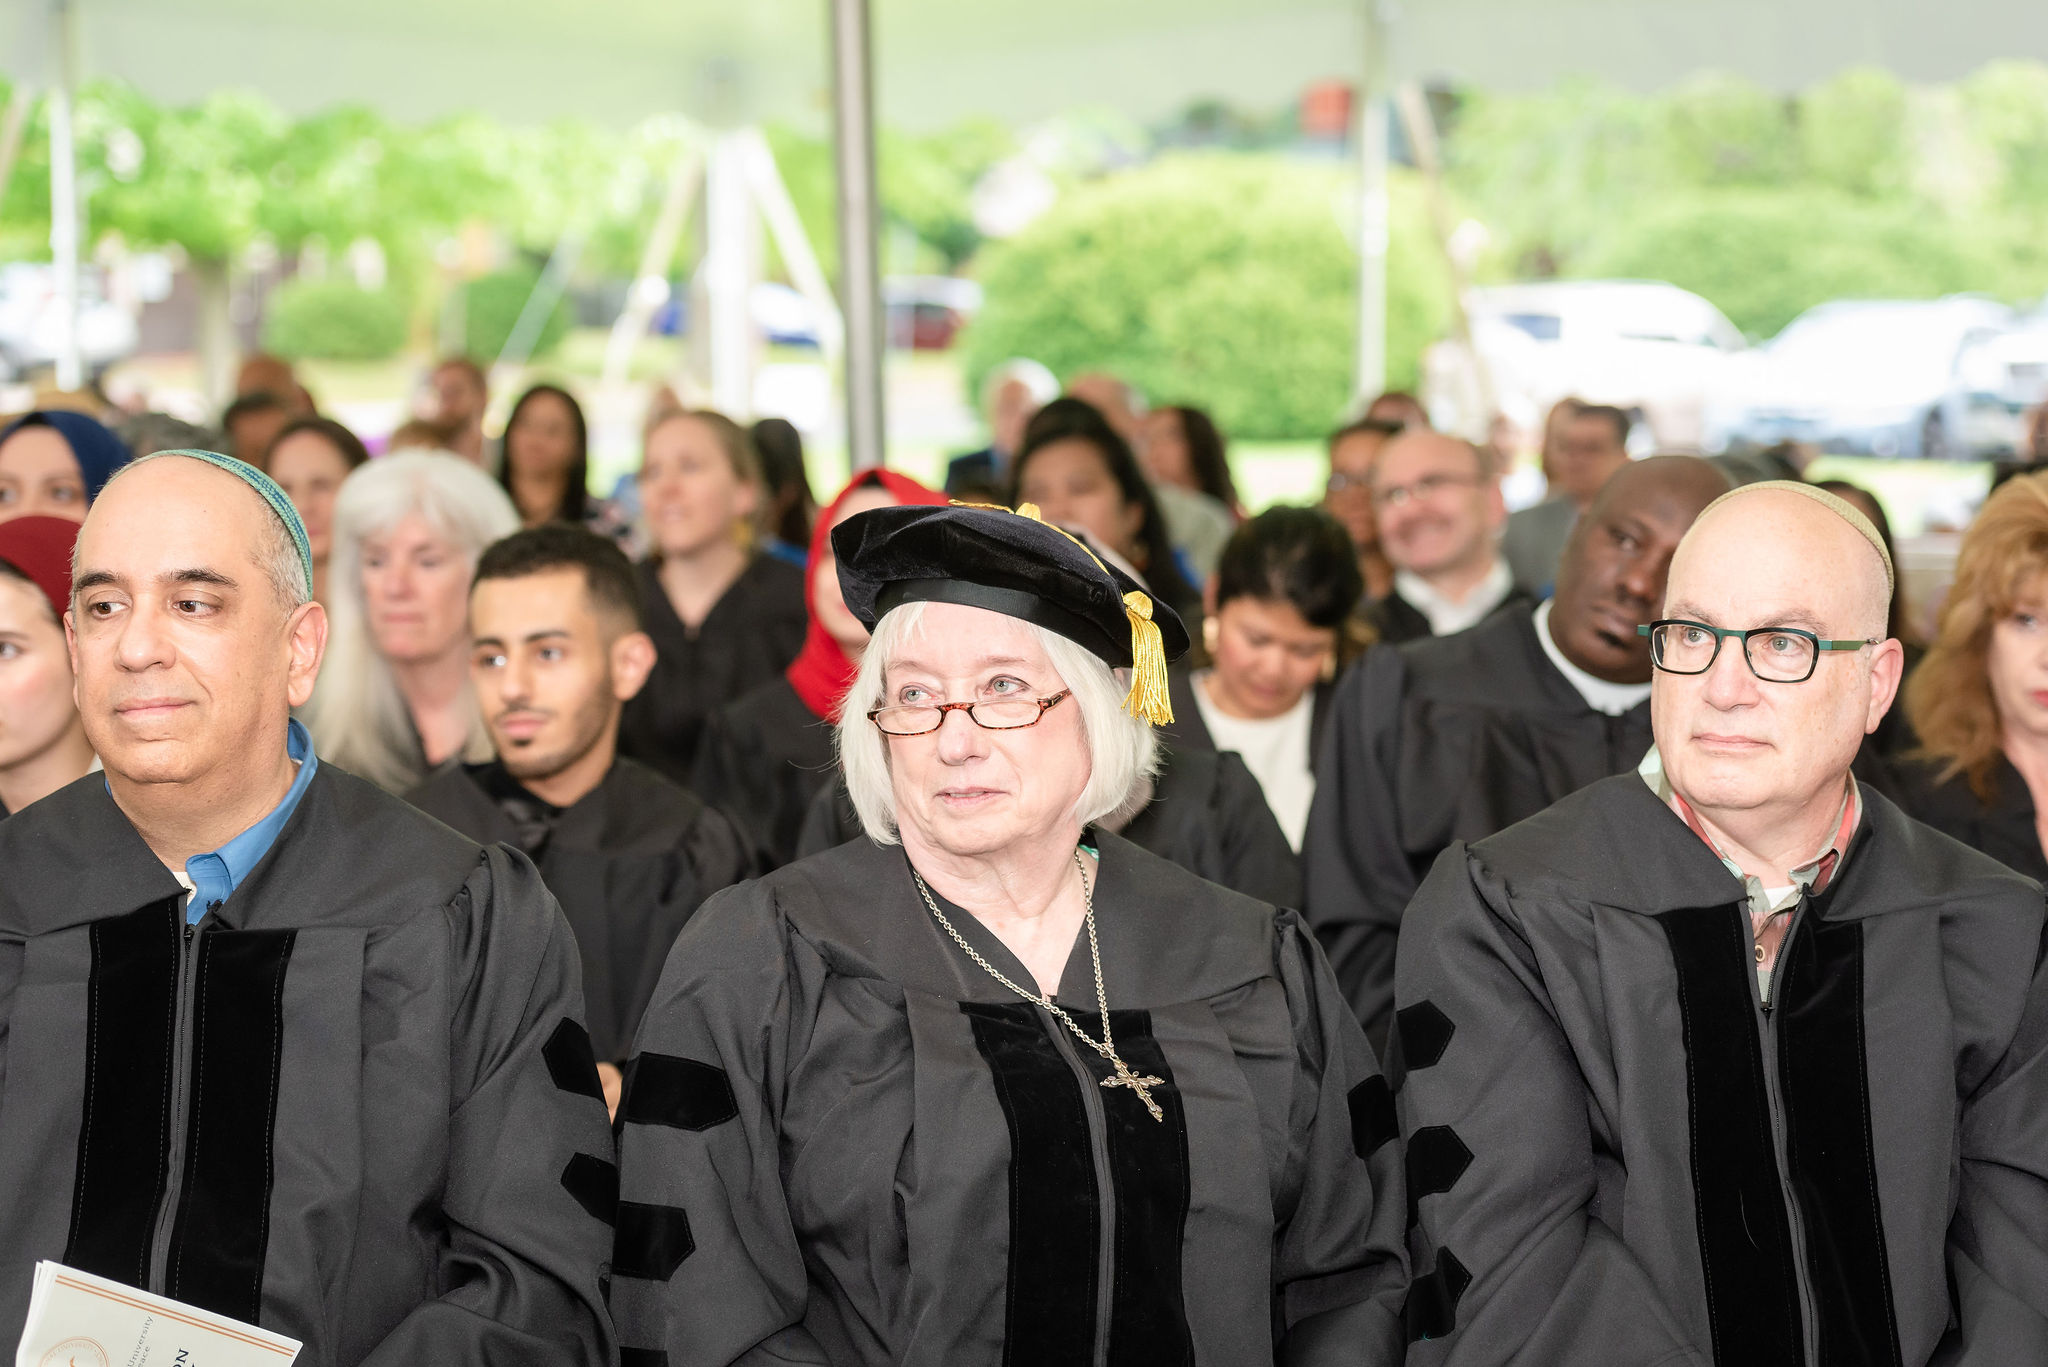 A crowd of seated graduates listening